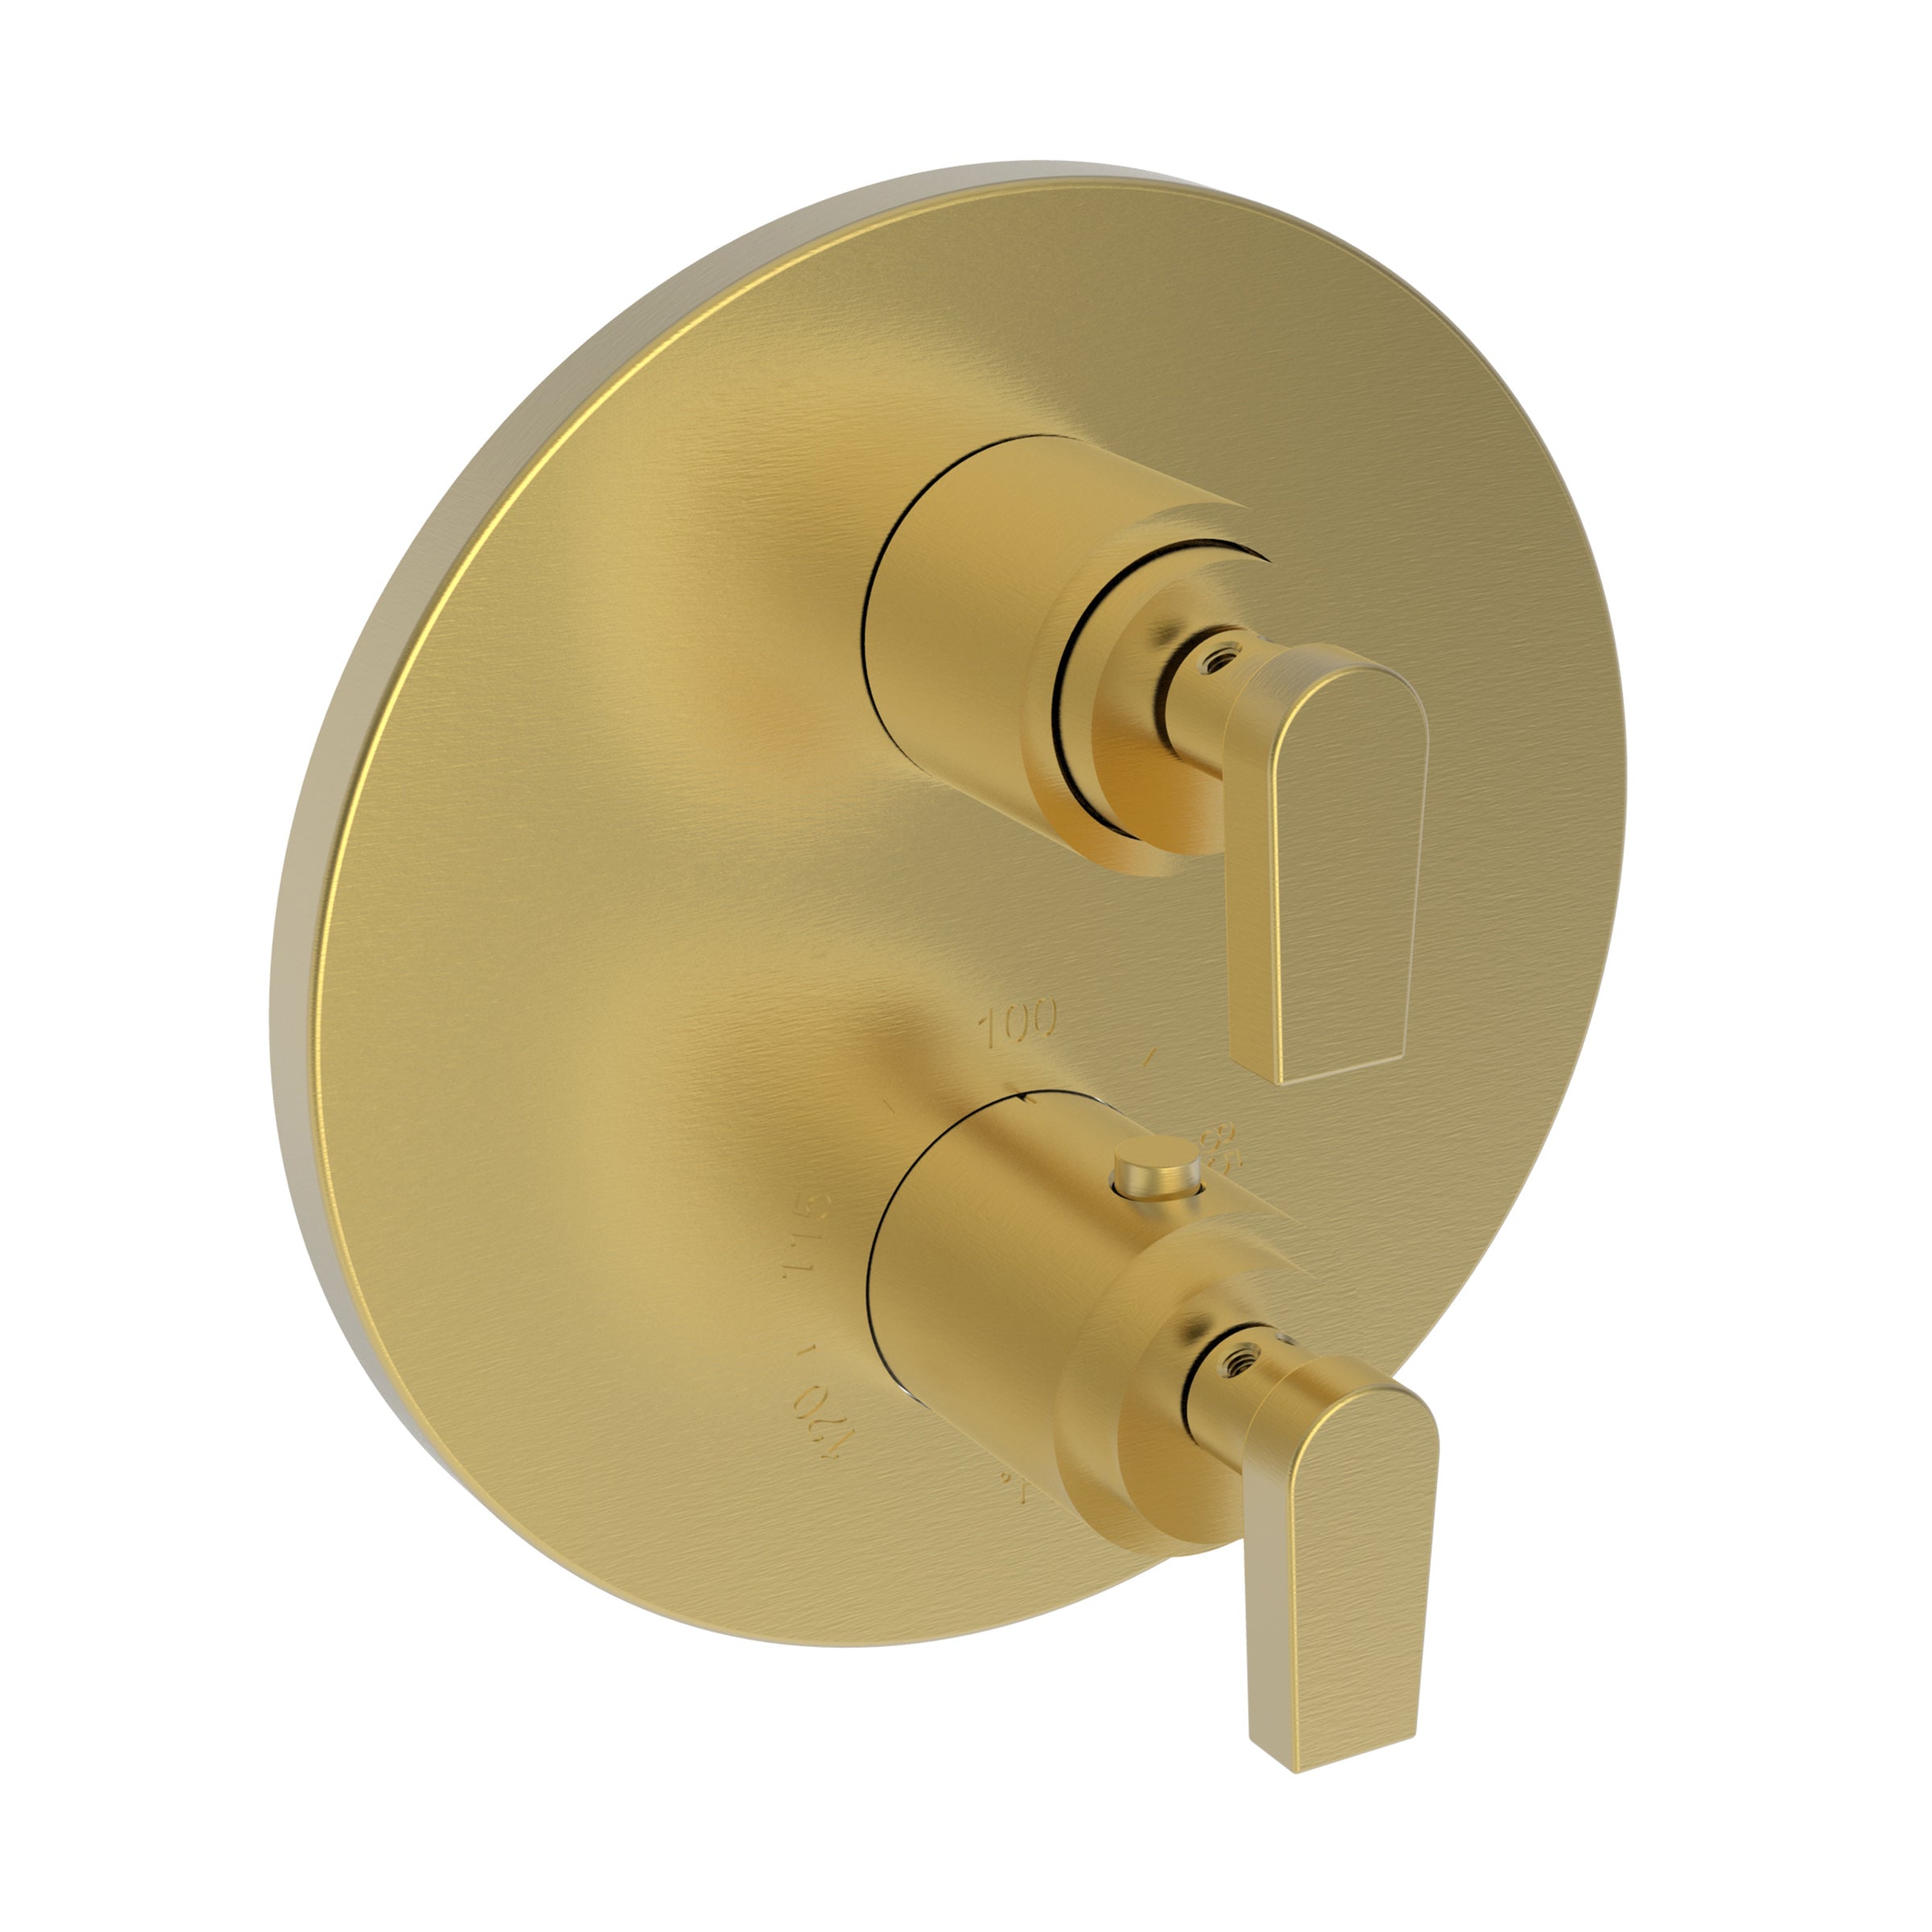 Newport Brass Dorrance 1/2" Round Thermostatic Trim Plate with Handle